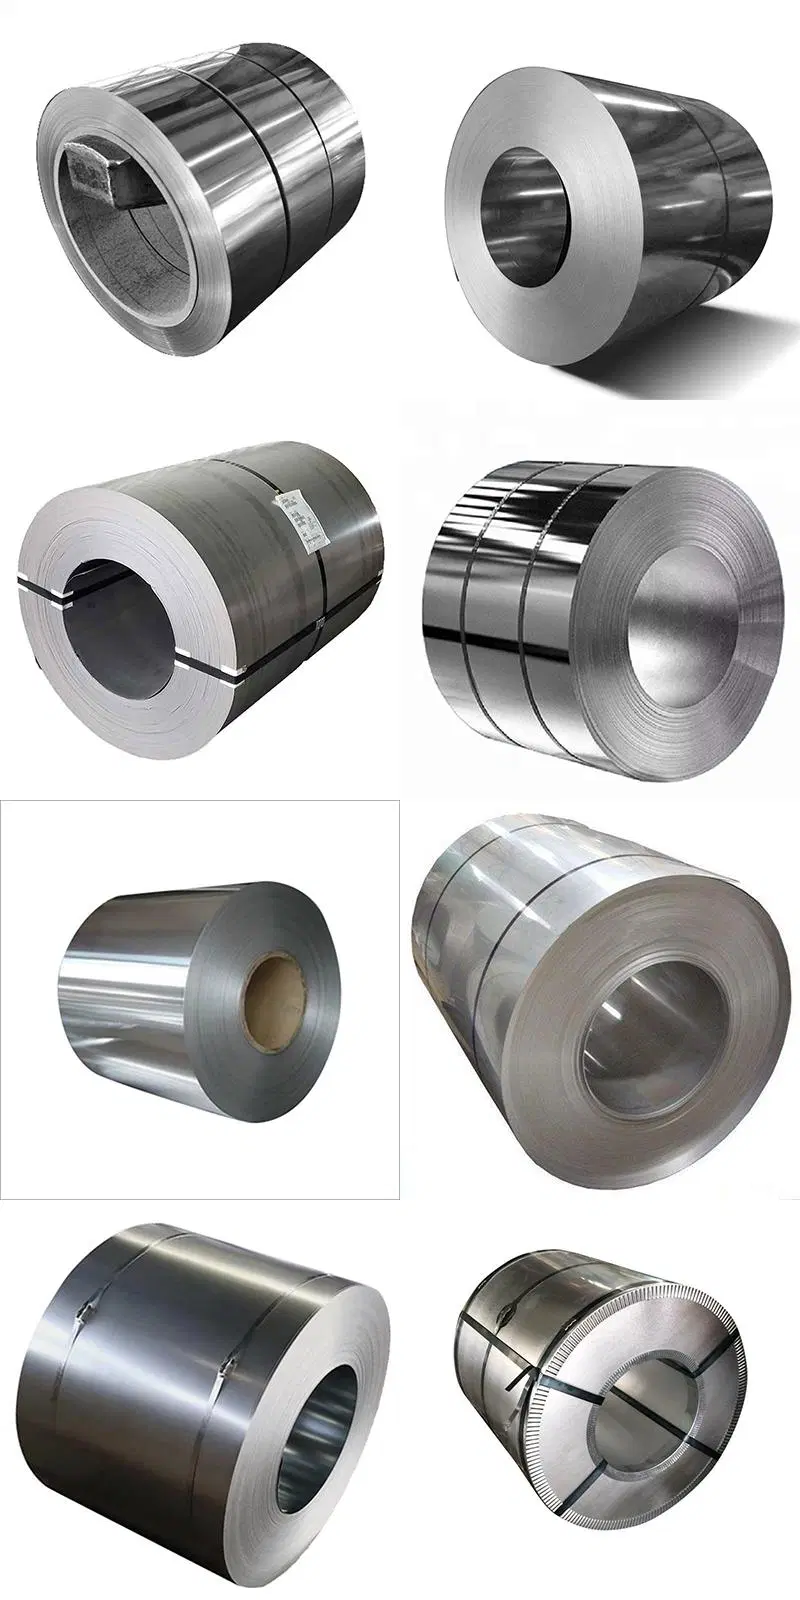 Custom Products Price Inconel X750 718 625 600 AMS 5662 Hastelloy C276 C22 X C Monel 400 K500 Incoloy 800 800h 825 Super Nickel Based Alloy Strip